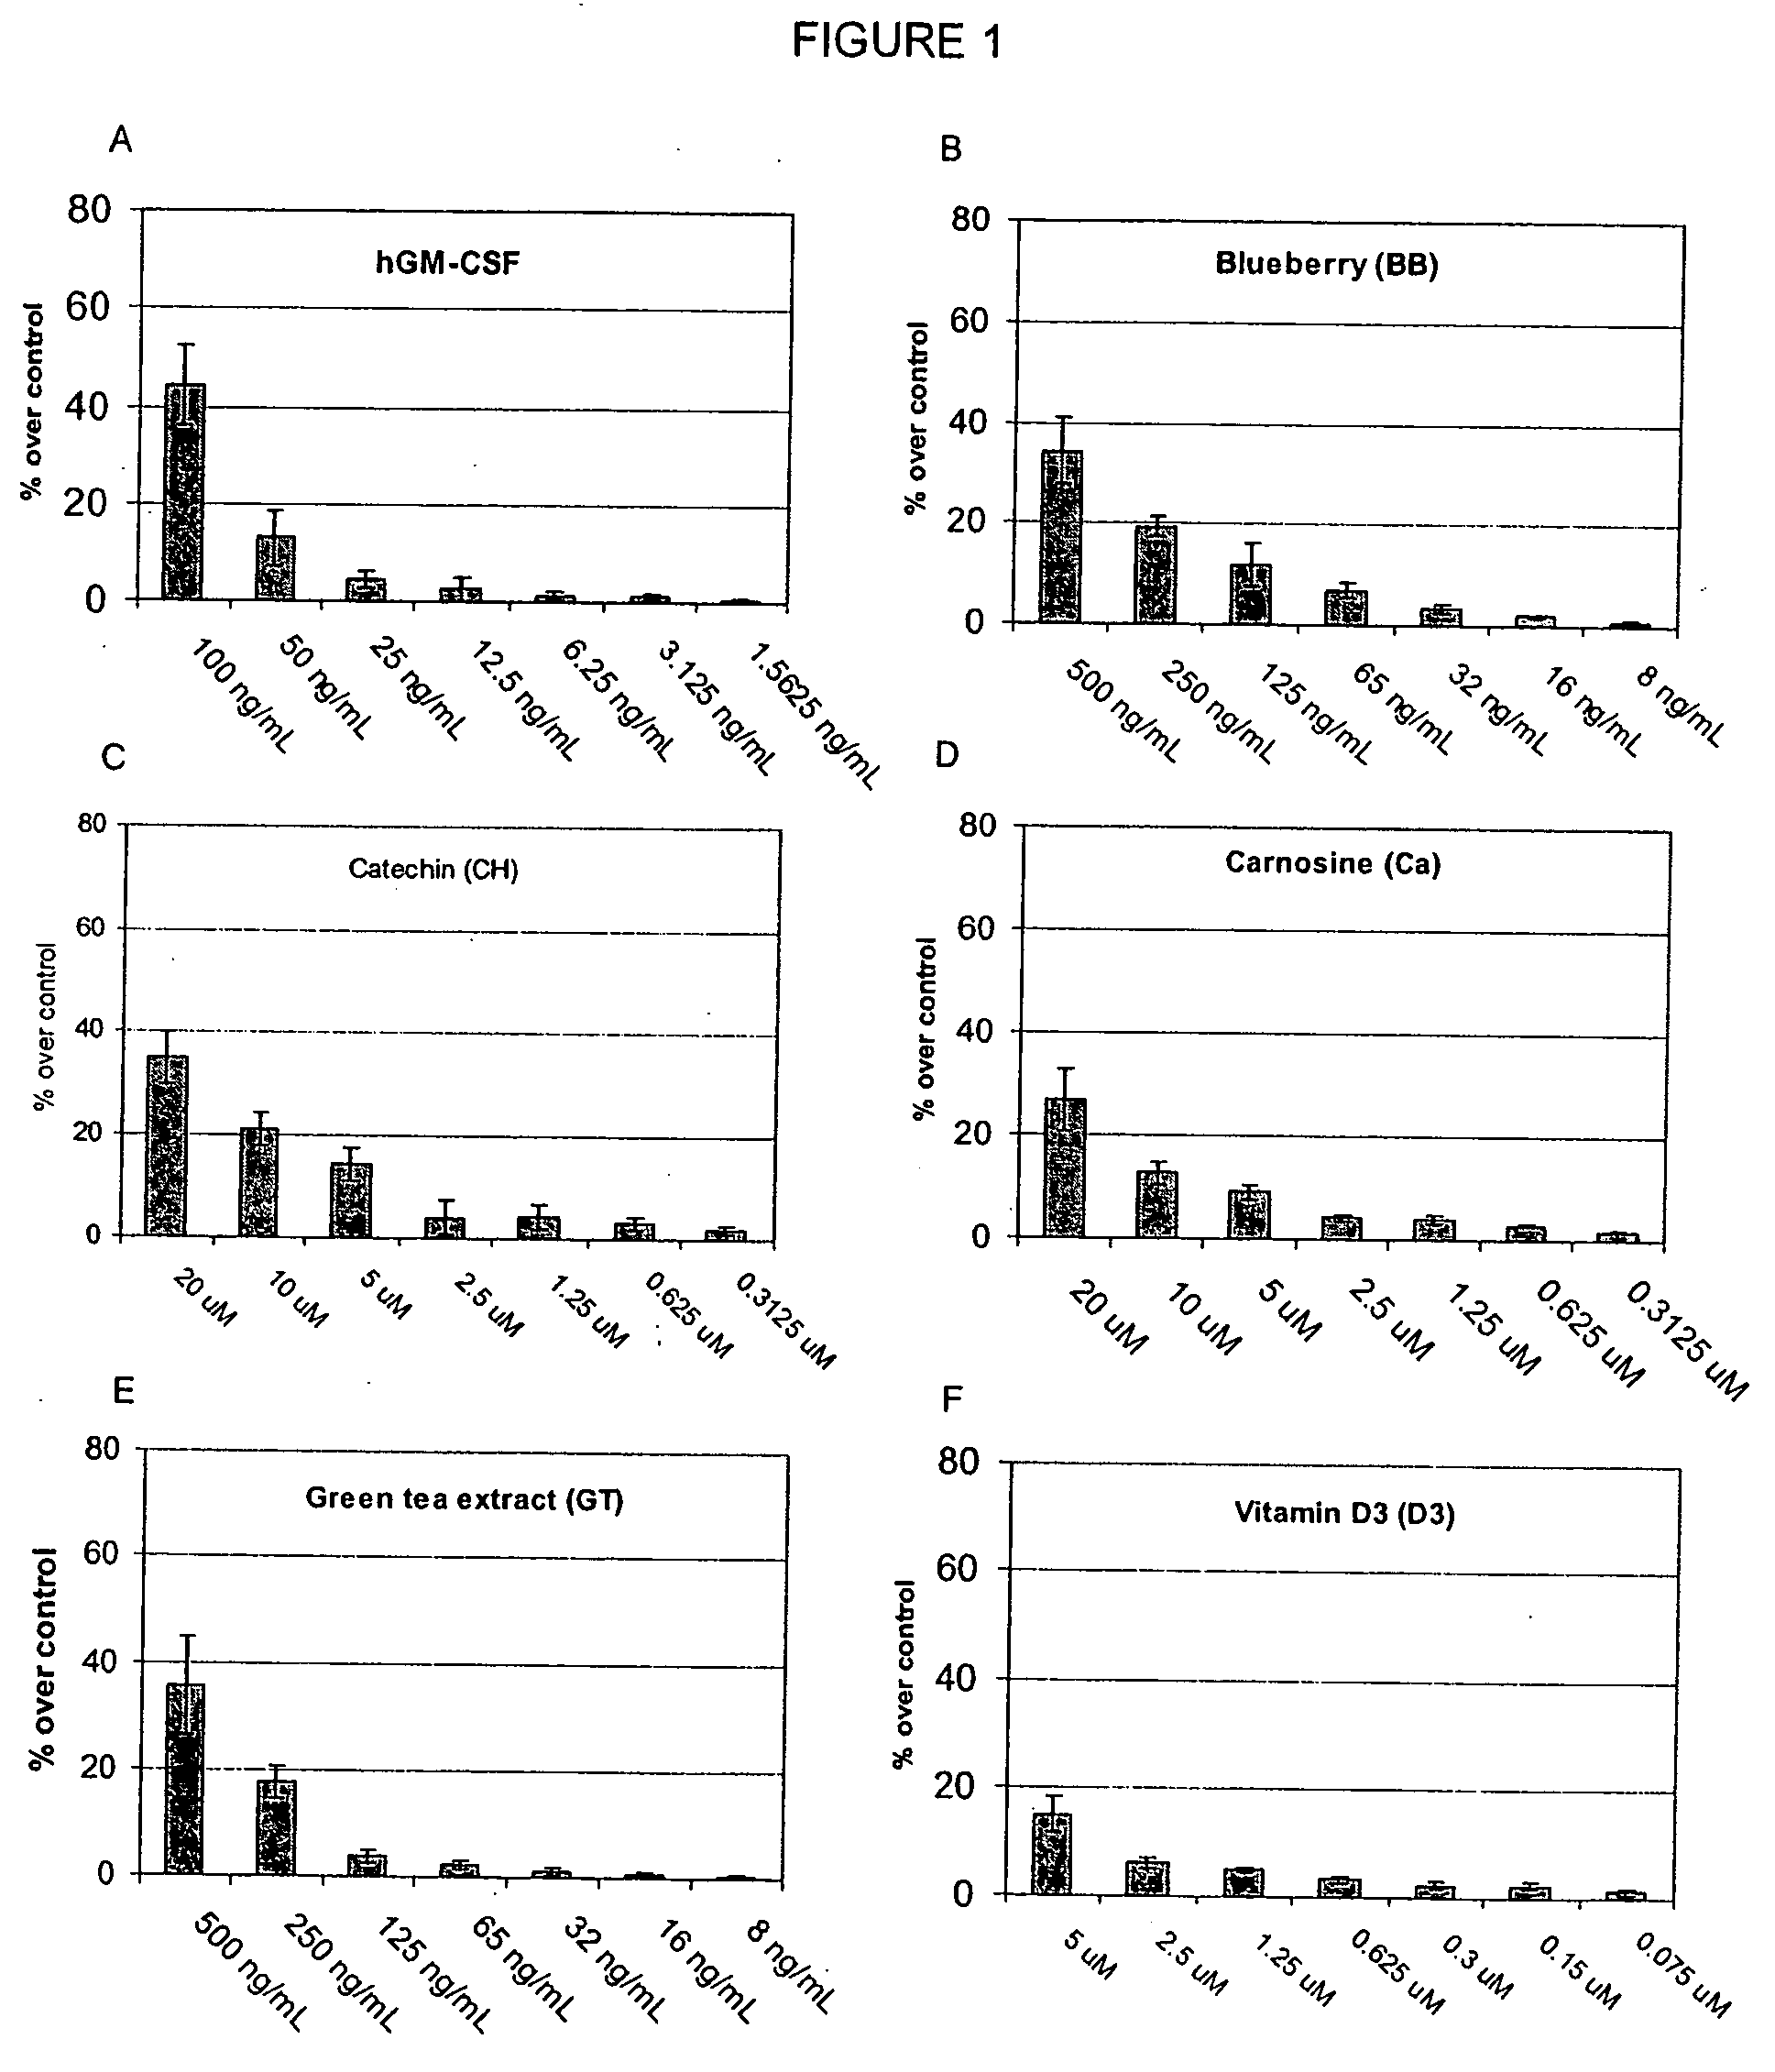 Combined effects of nutrients on proliferation of stem cells